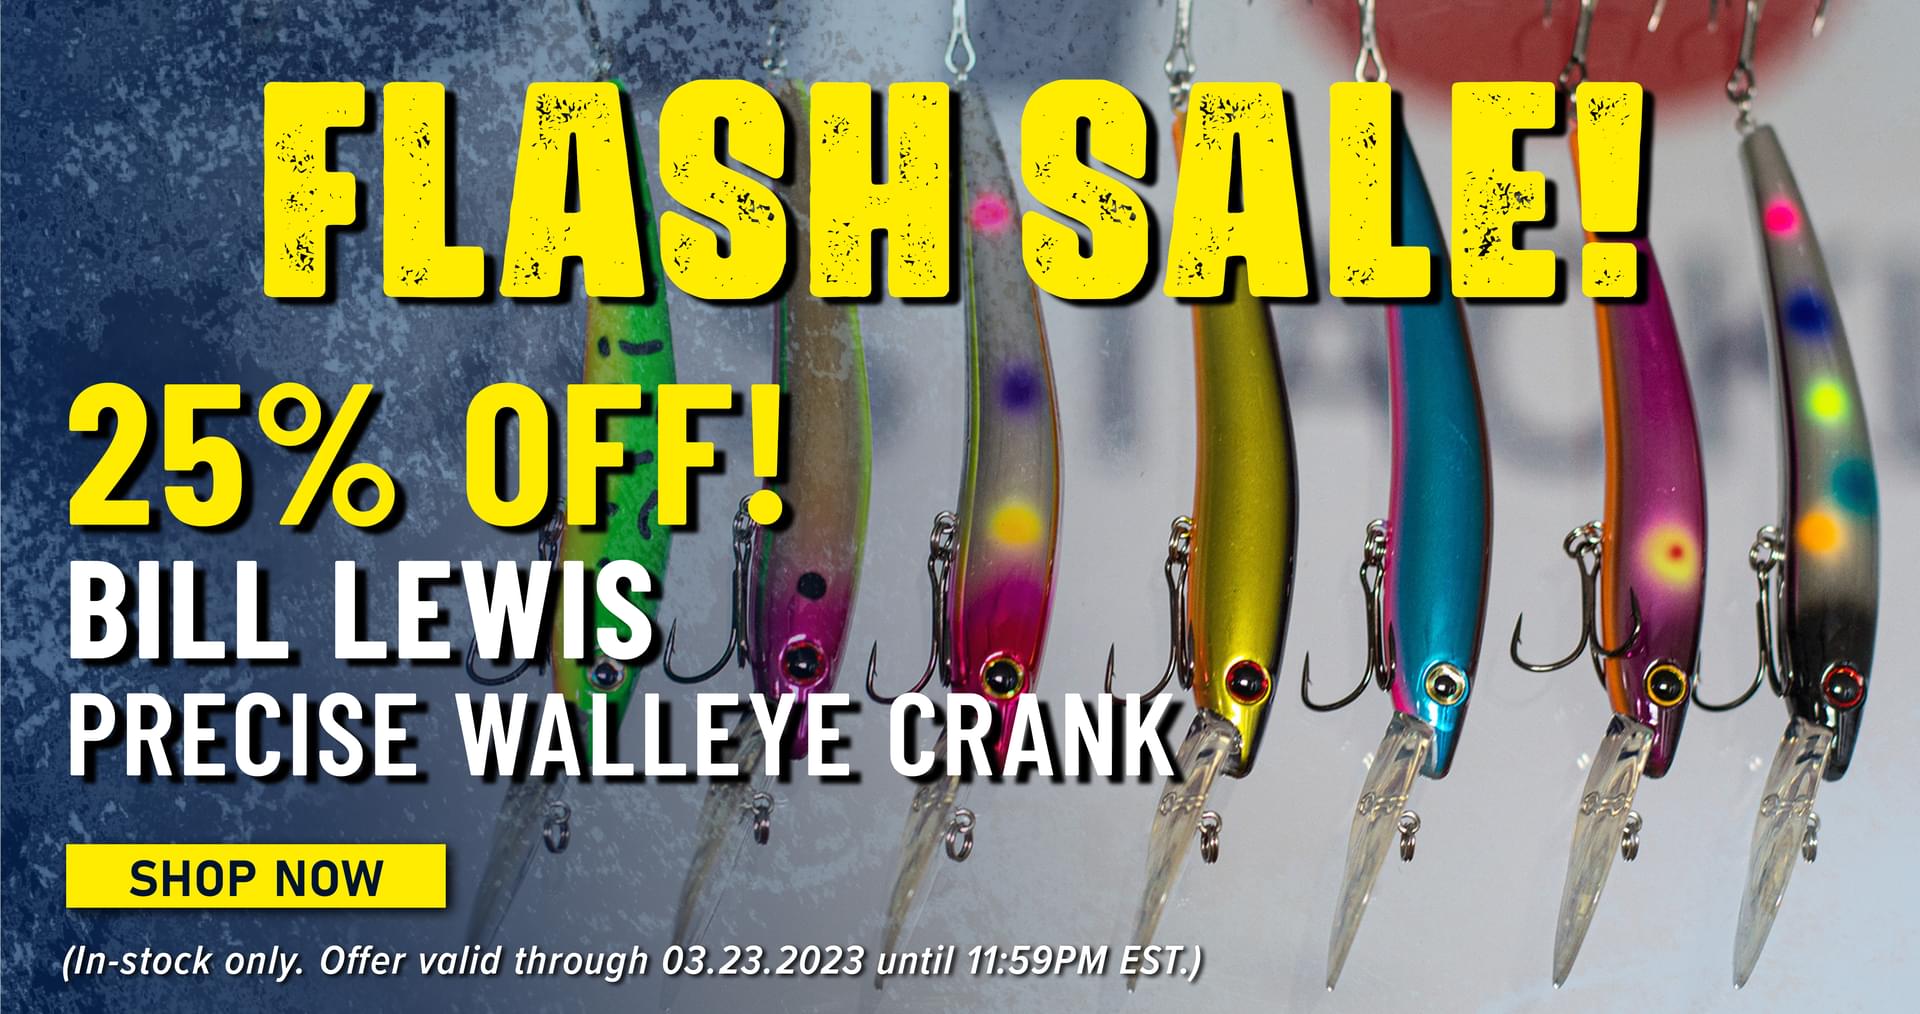 Flash Sale 25% Off! Bill Lewis Precise Walleye Crank Shop Now (In-stock only. Offer valid through 03.23.2023 until 11:59PM EST.)